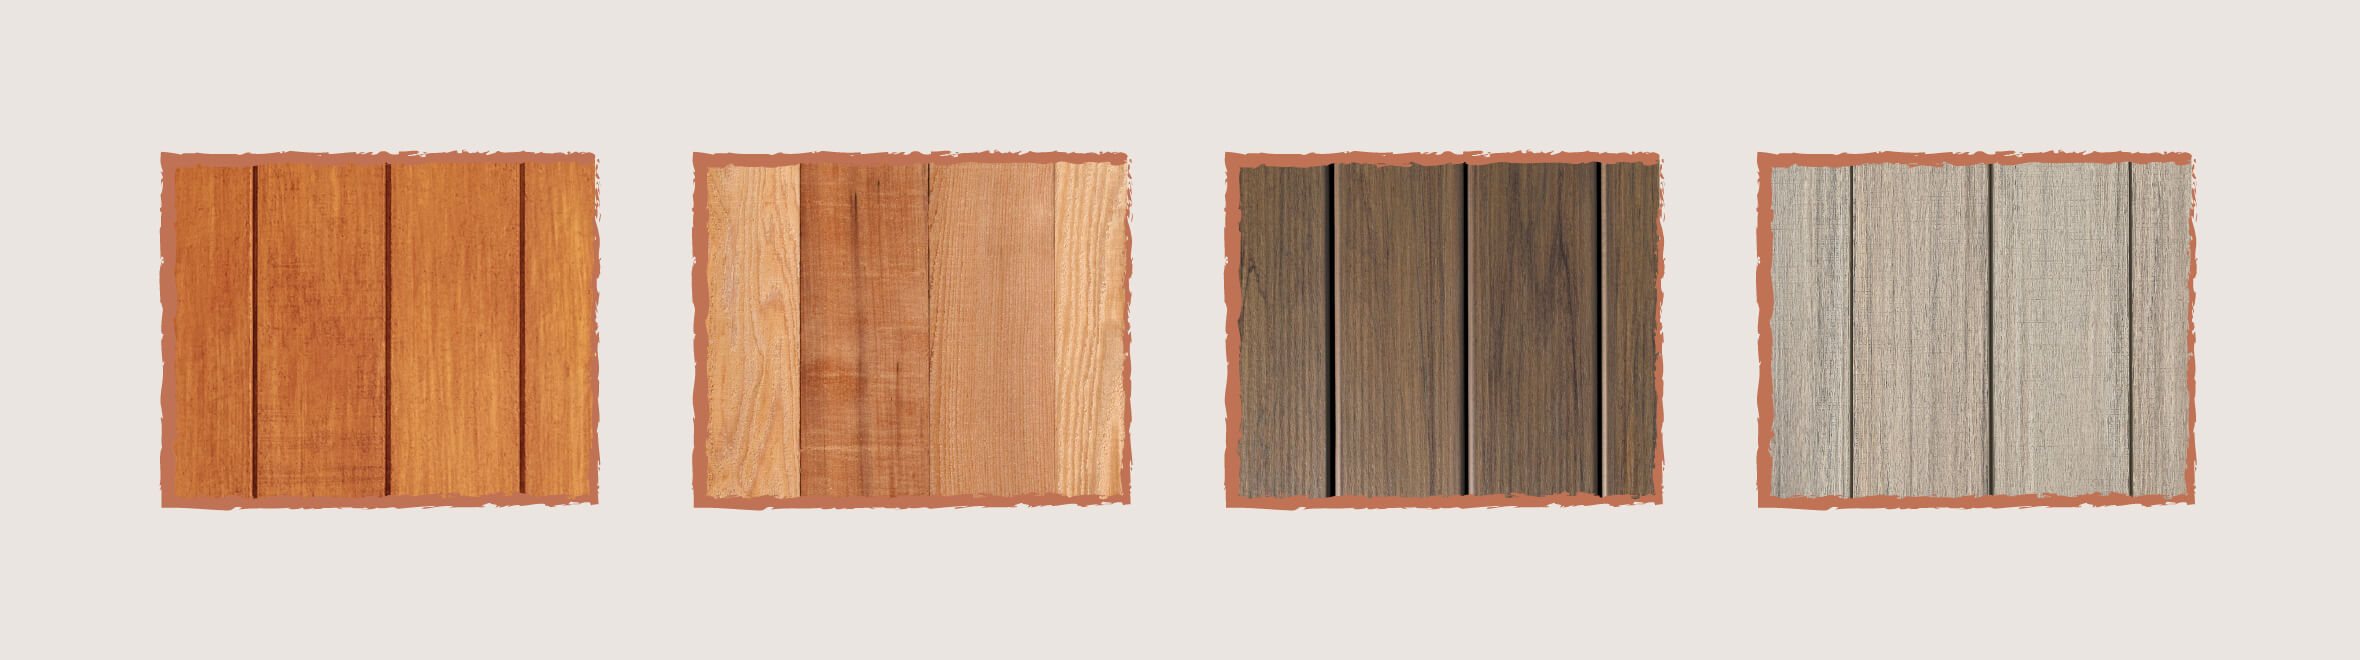 Comparison of four decking material options, including pressure-treated wood, hard and softwoods, composite, and PVC. 